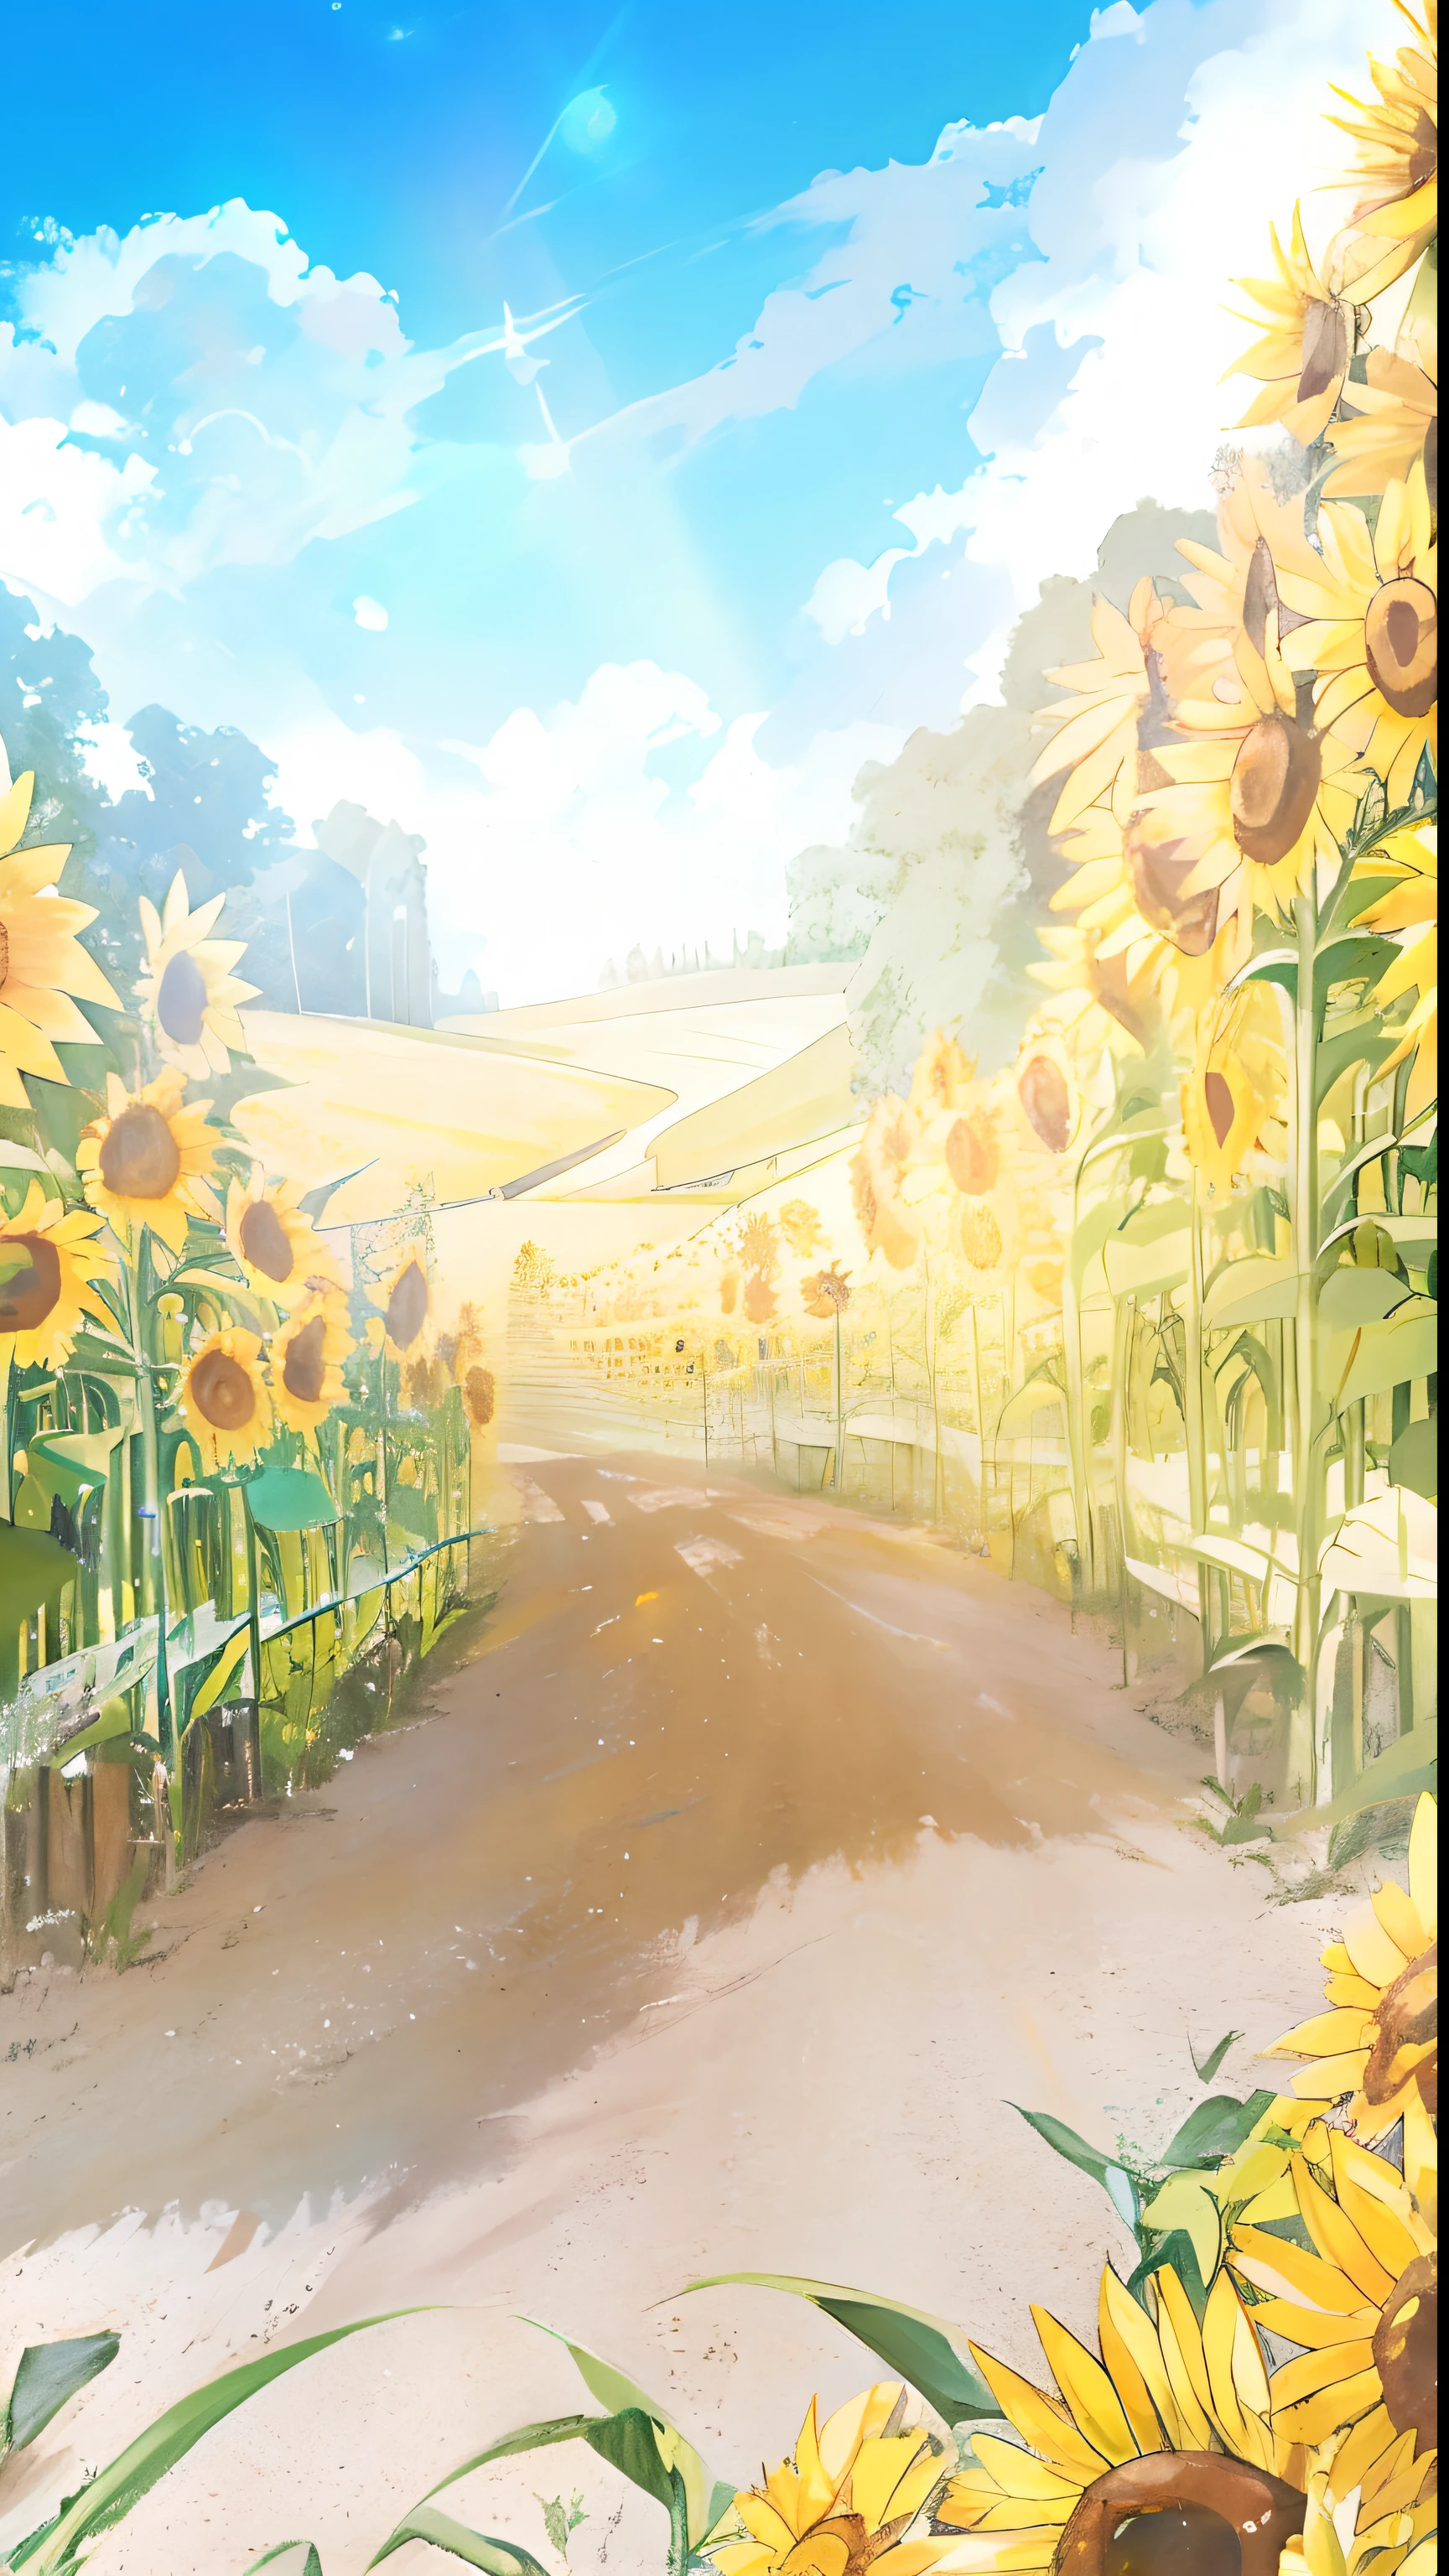 Anime Character with Sunflowers | You Are My Sunshine